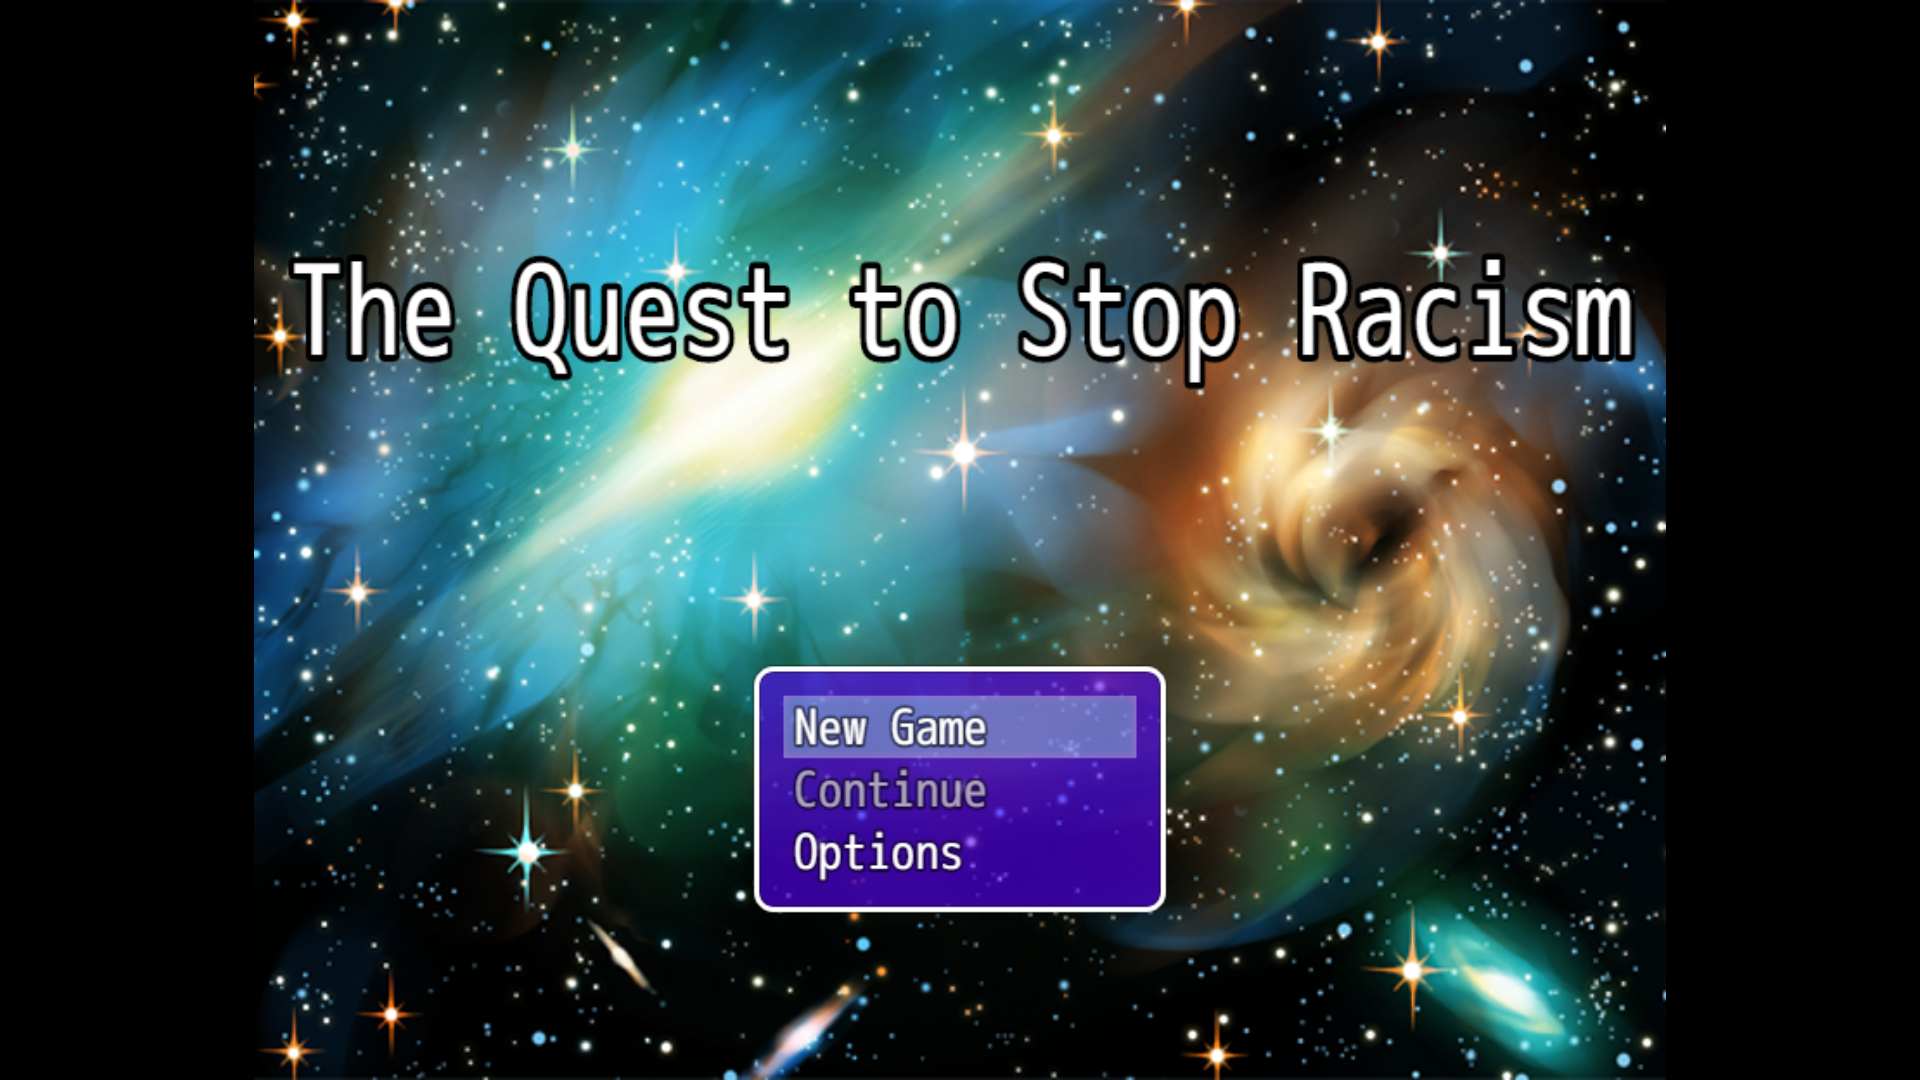 The Quest to Stop Racism